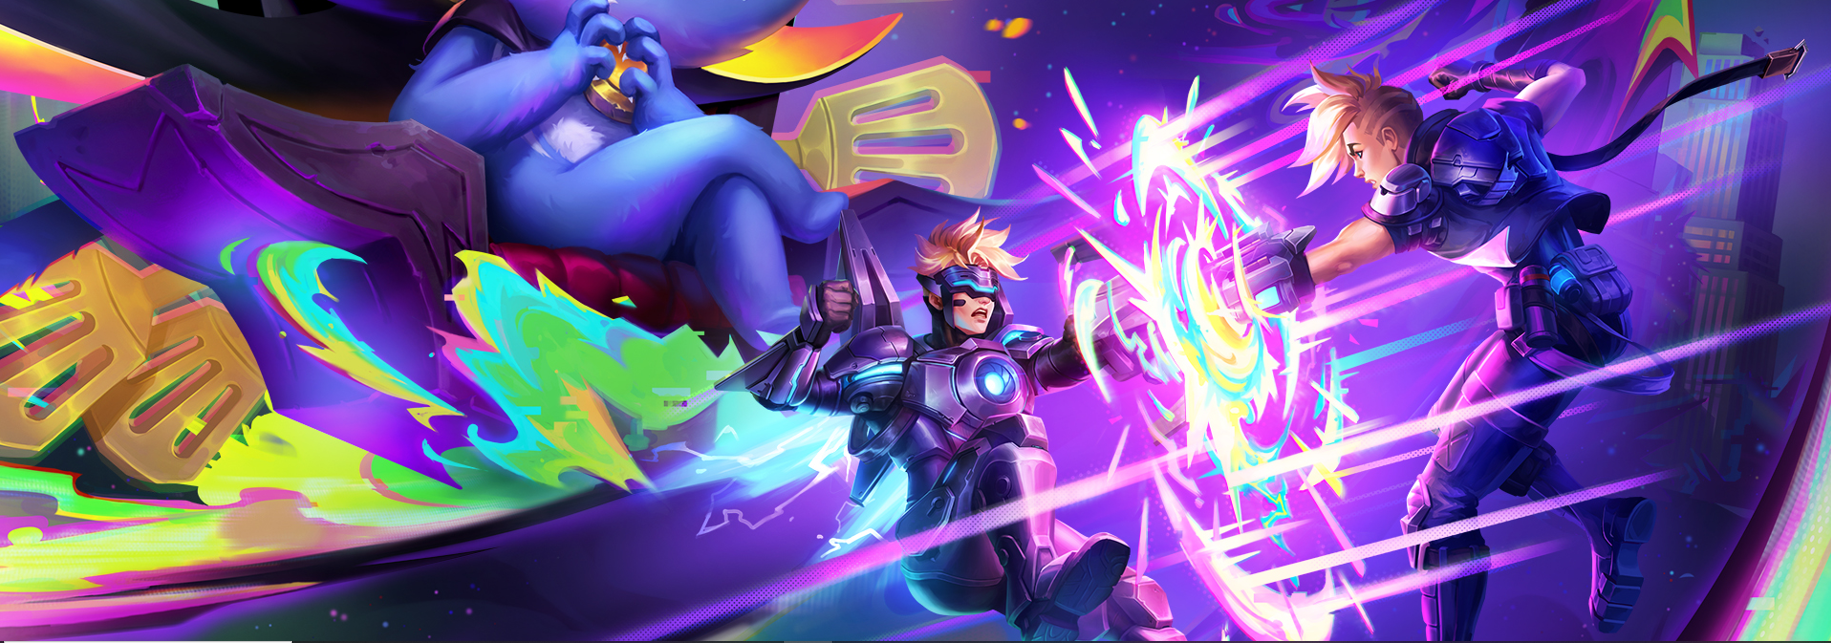 TFT Set 8.5 Glitched Out: New Champions and Traits